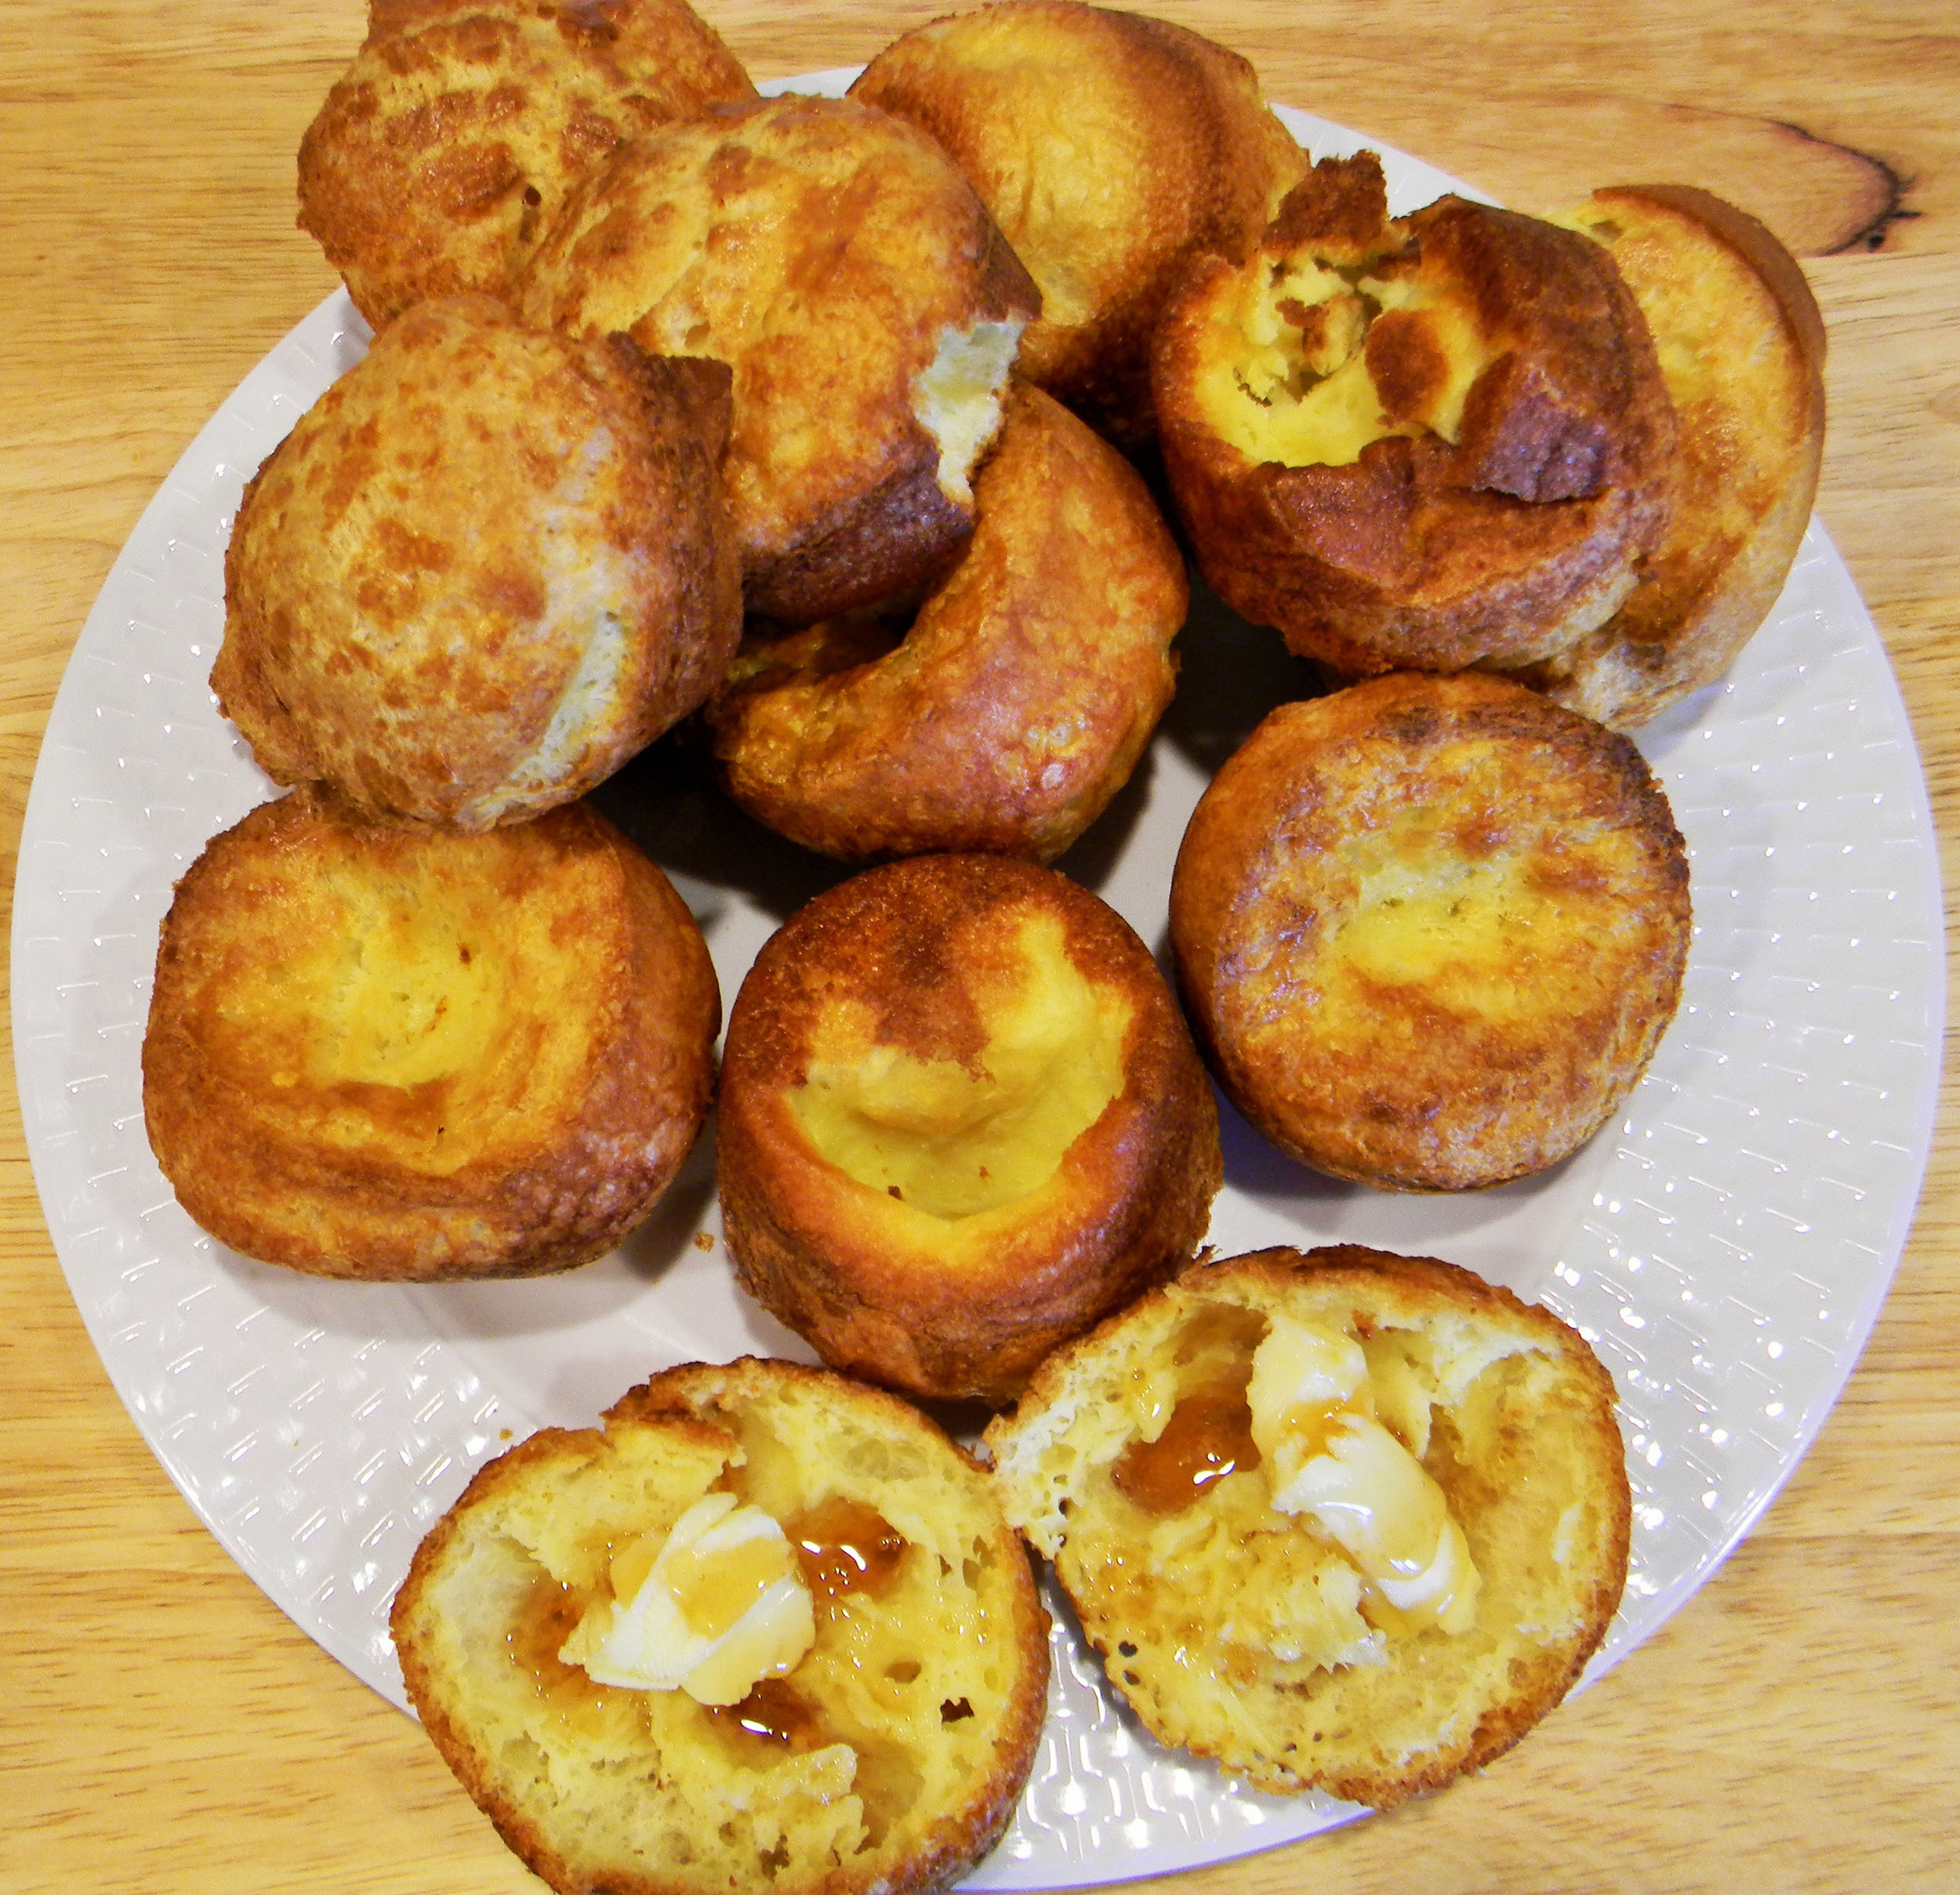 Butter on Popovers